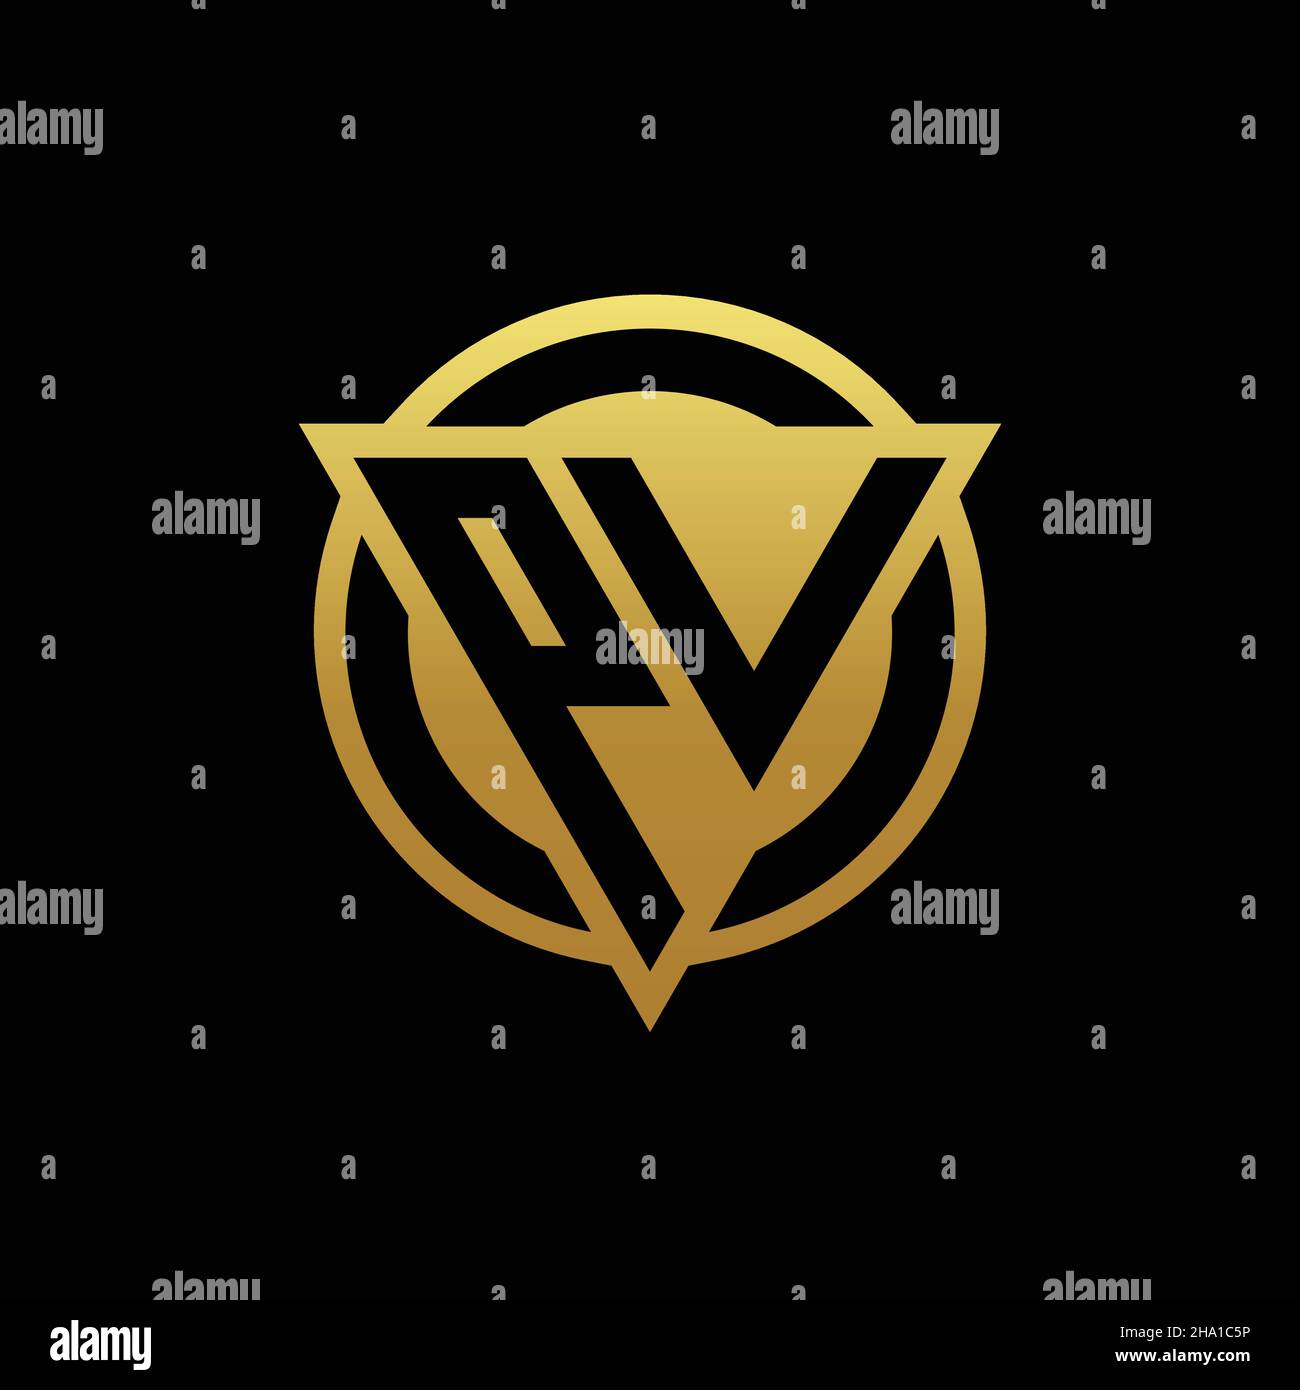 PV logo monogram with triangle shape and circle rounded style isolated ...